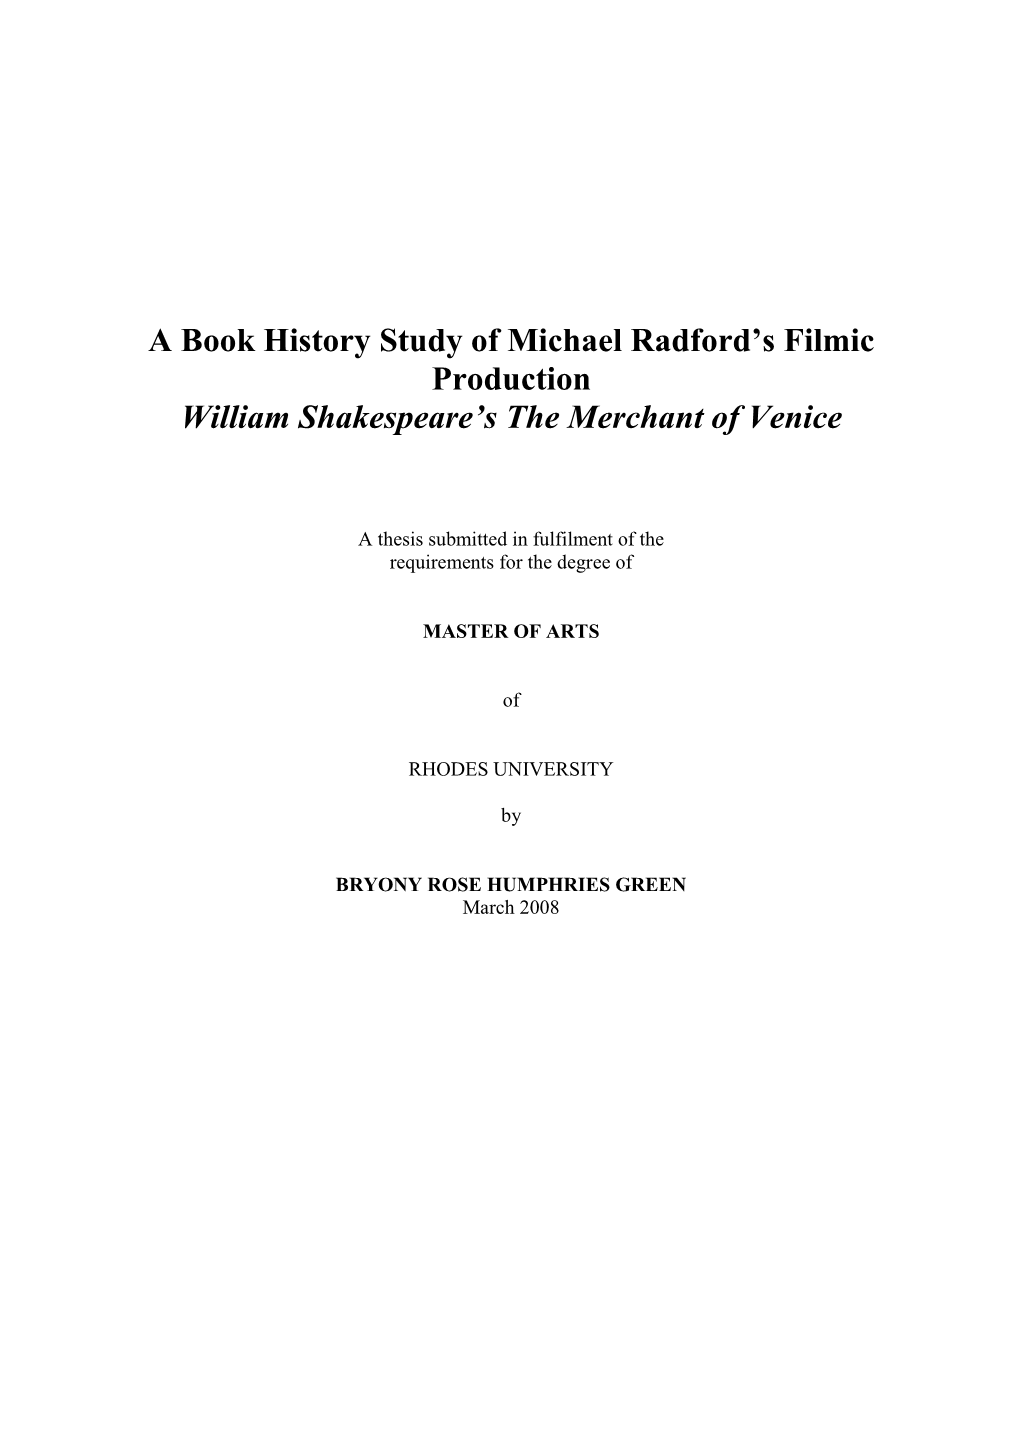 Downloadable Text (Finkelstein and Mccleery 2006, 1)